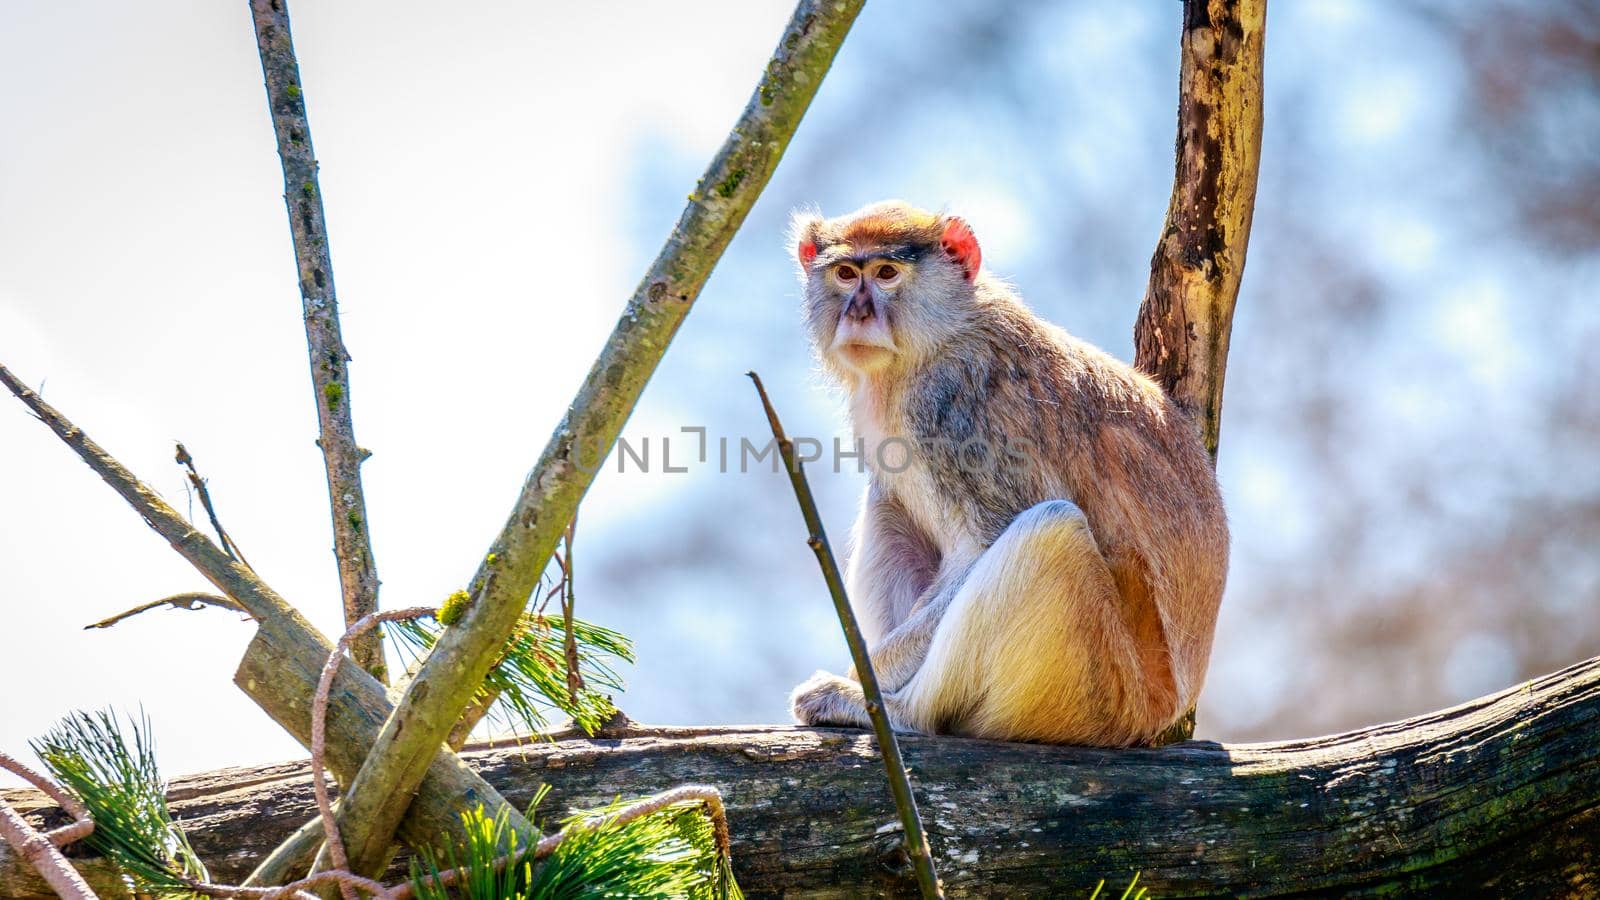 A Patas Monkey sits on the tree branch.